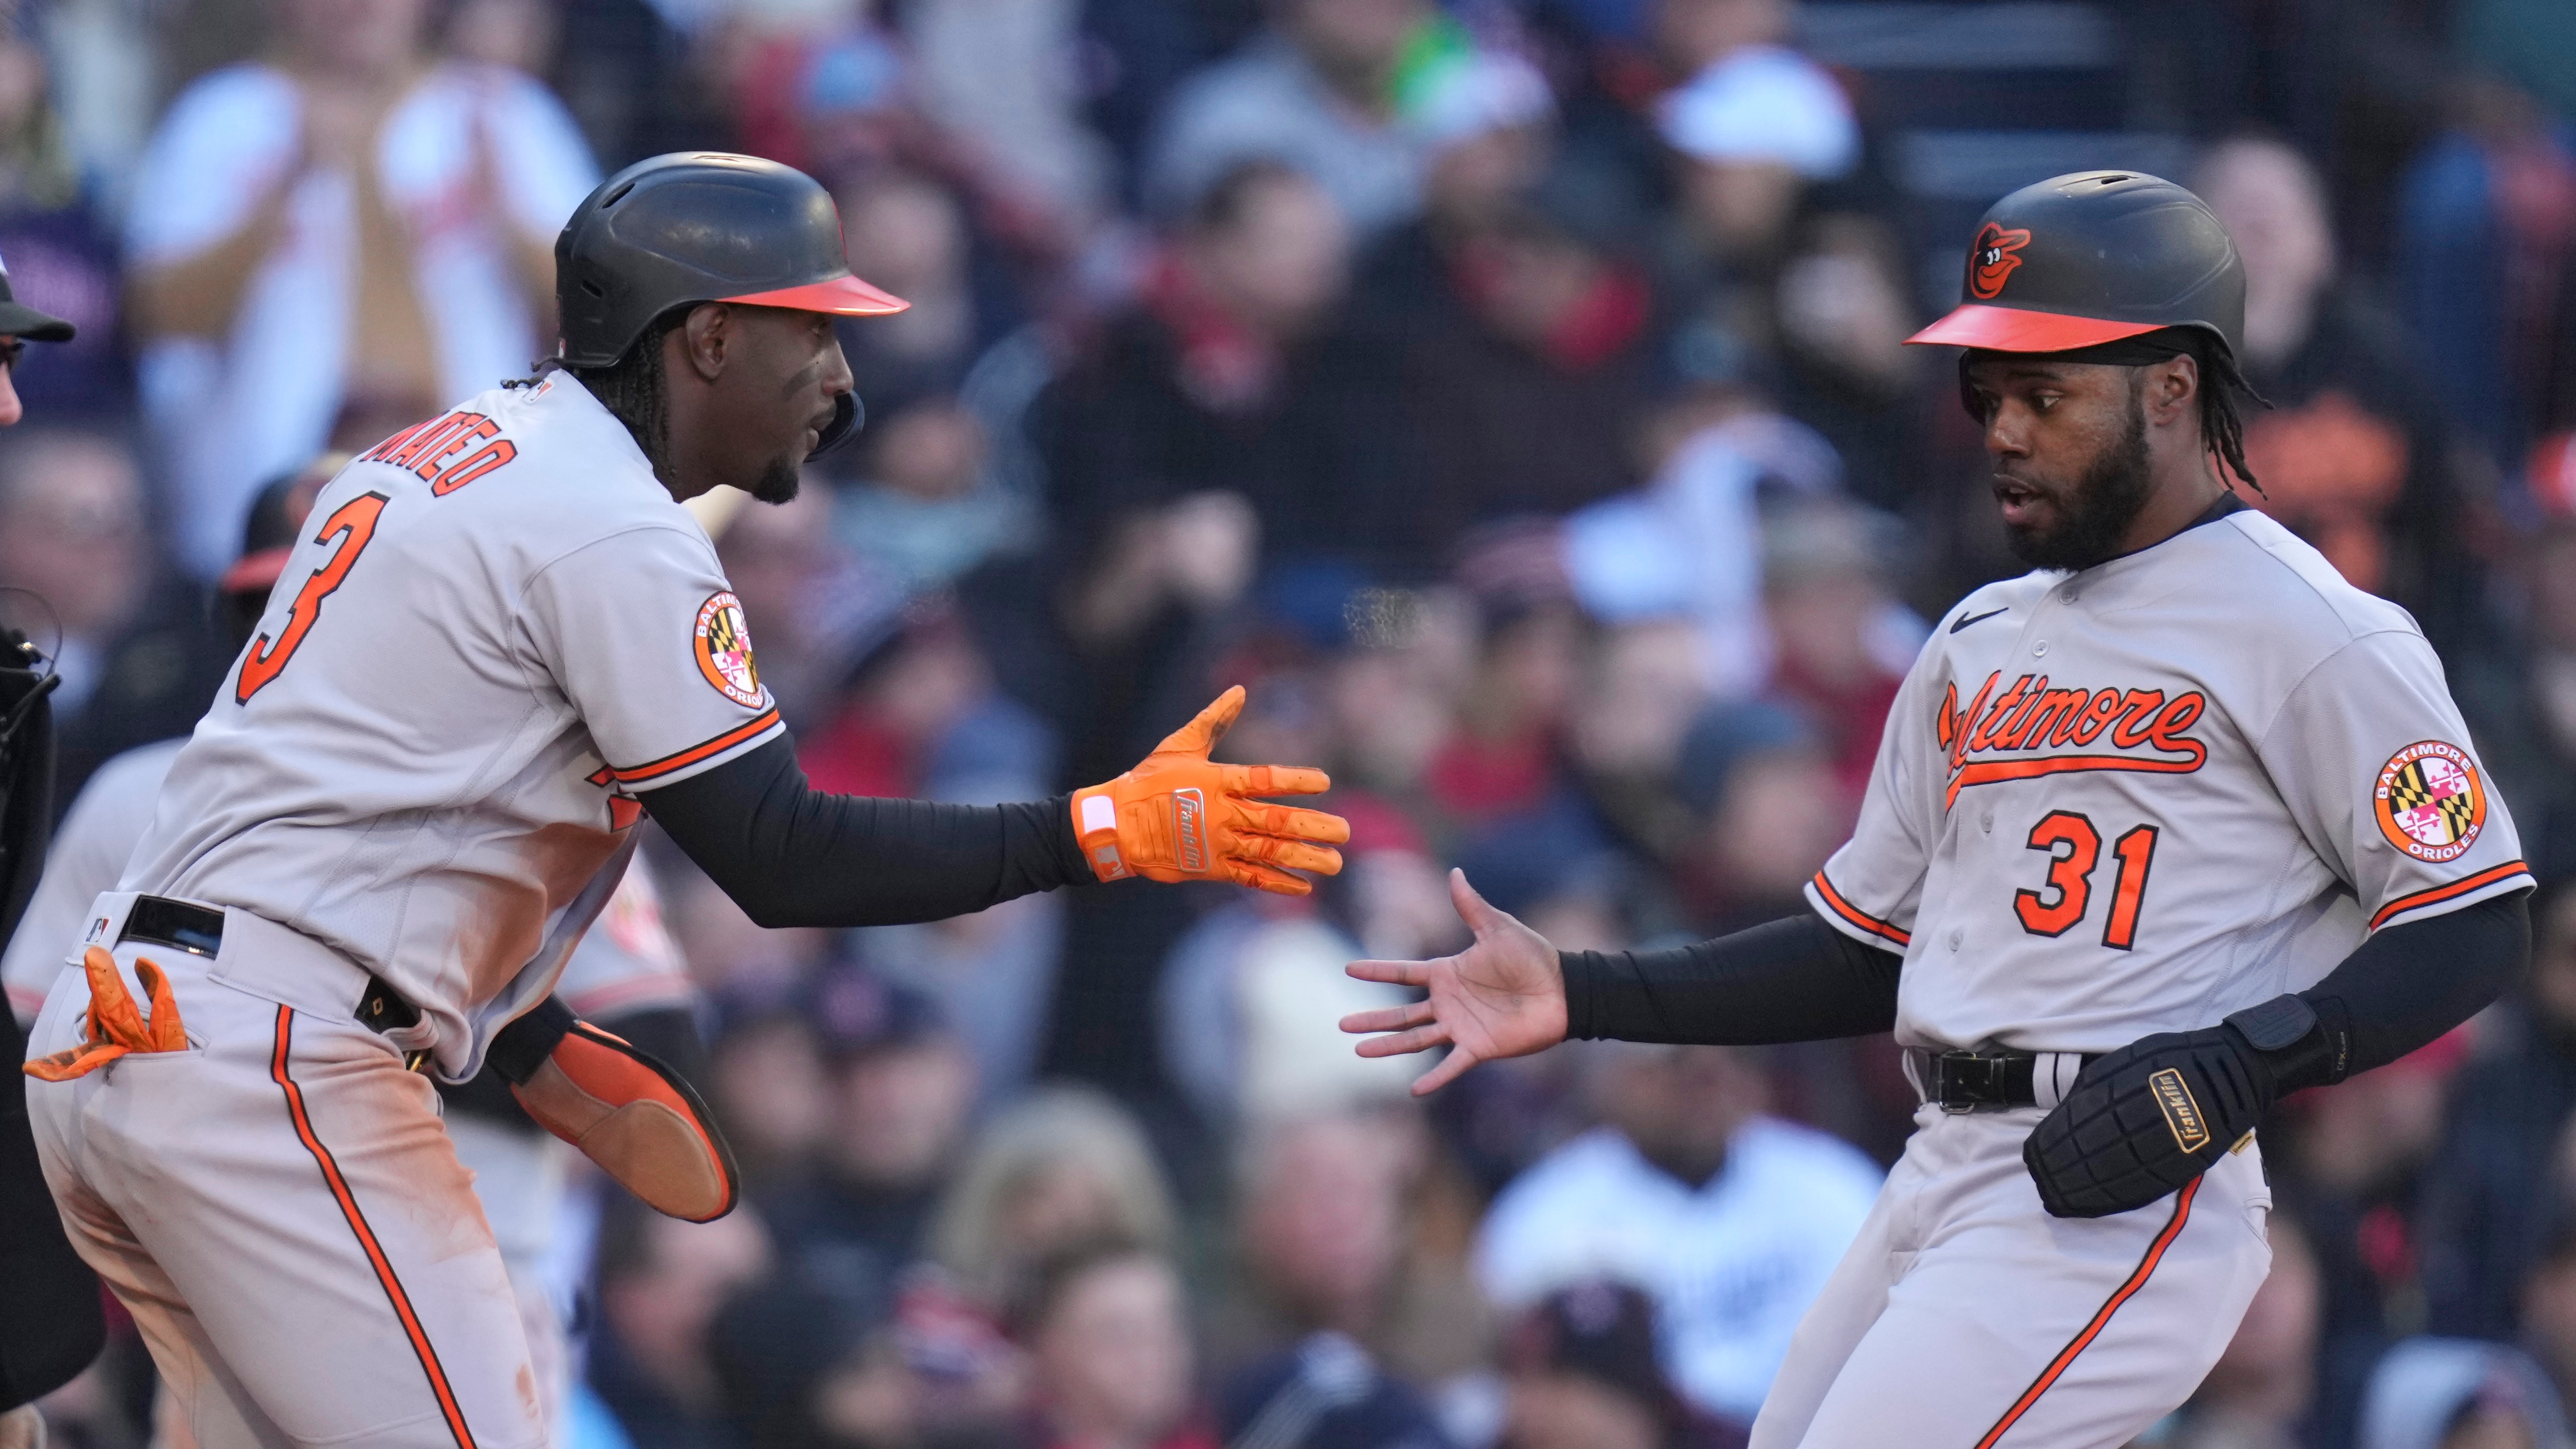 With homers, steals and celebrations, Orioles' young talent